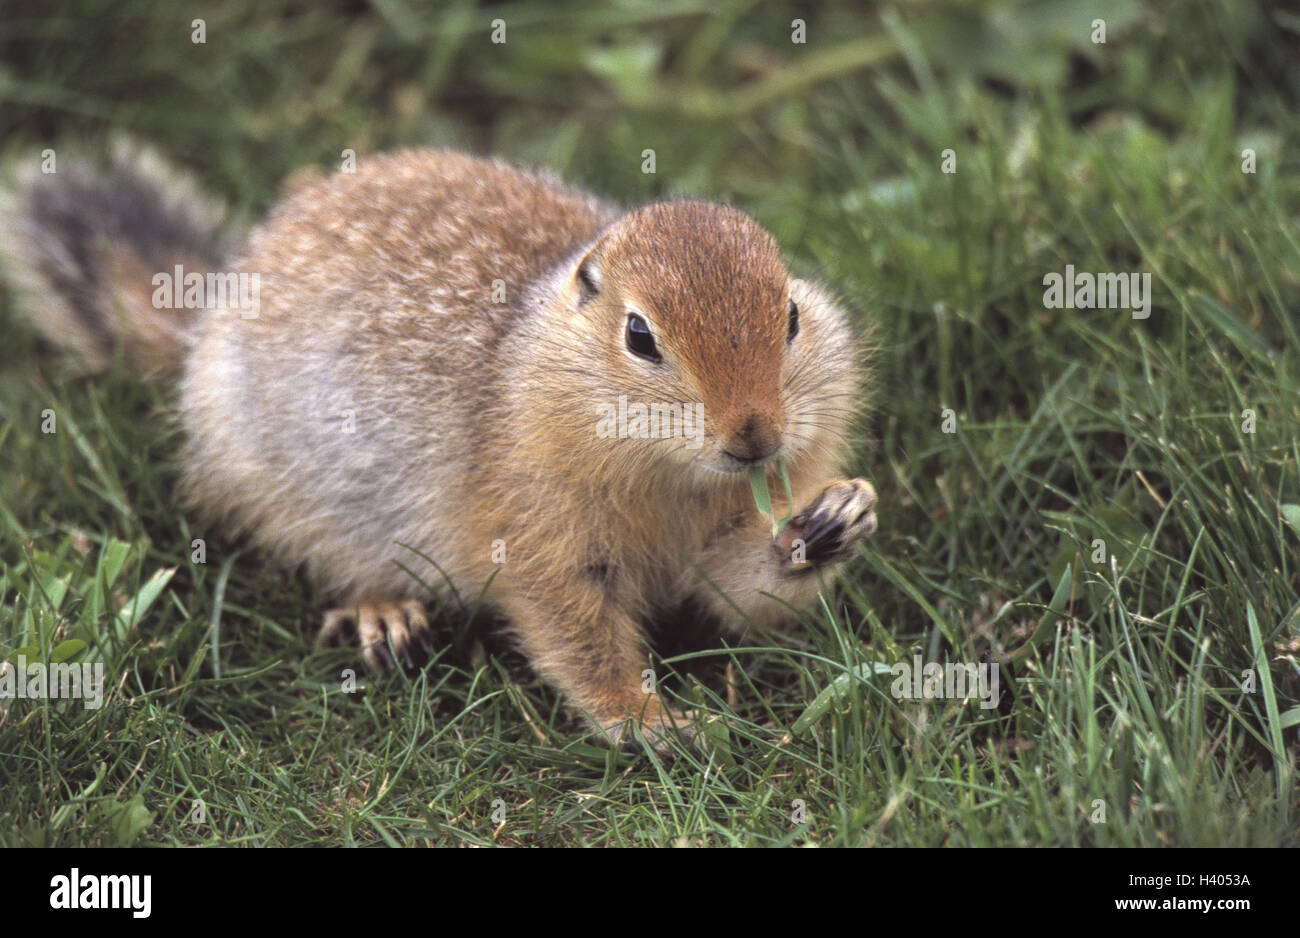 Alaska, Ziesel, Spermophilus parryi, animals, animal, Ziesel, rodents, rodent, croissant, Parry-Ziesel, arctic croissant, food search, ingestion Stock Photo